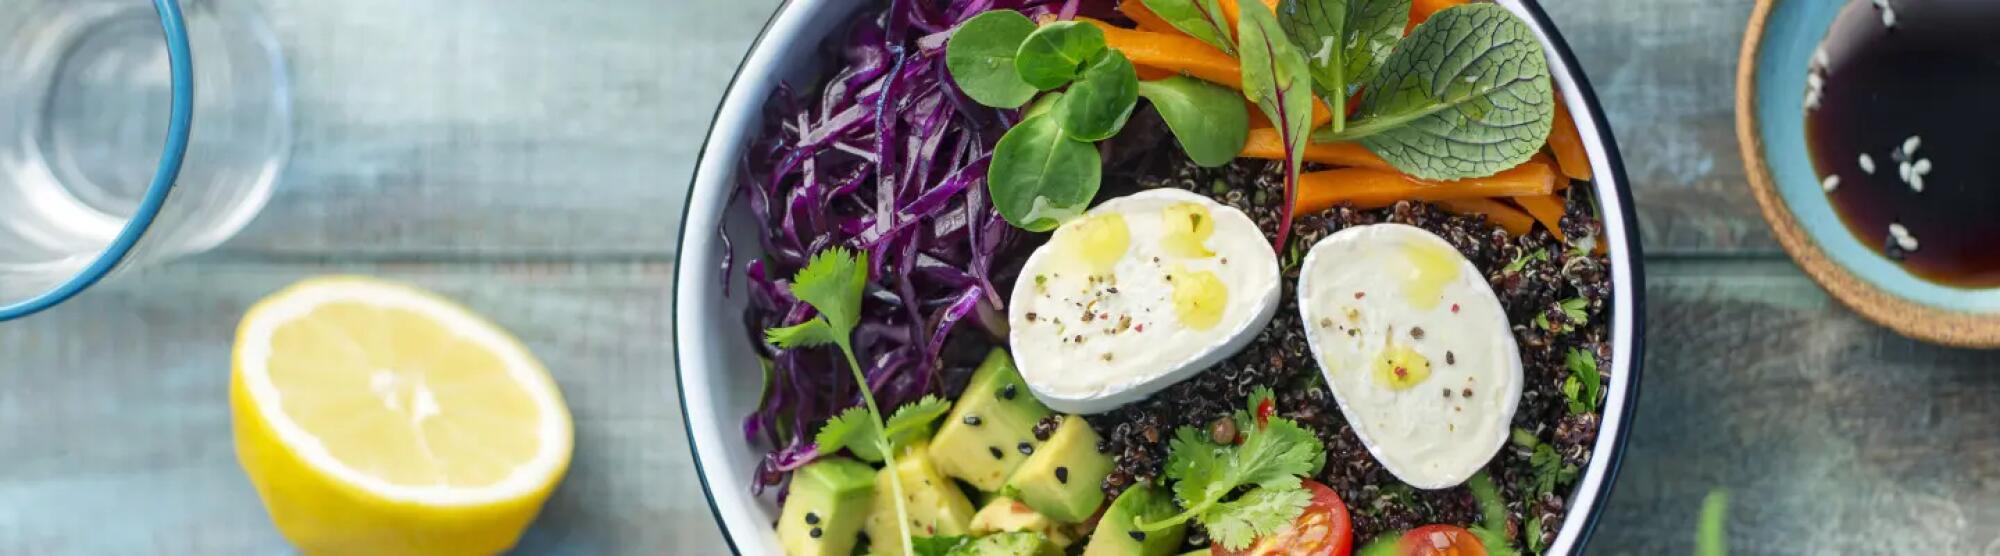 Recette : Buddha bowl complet au fromage